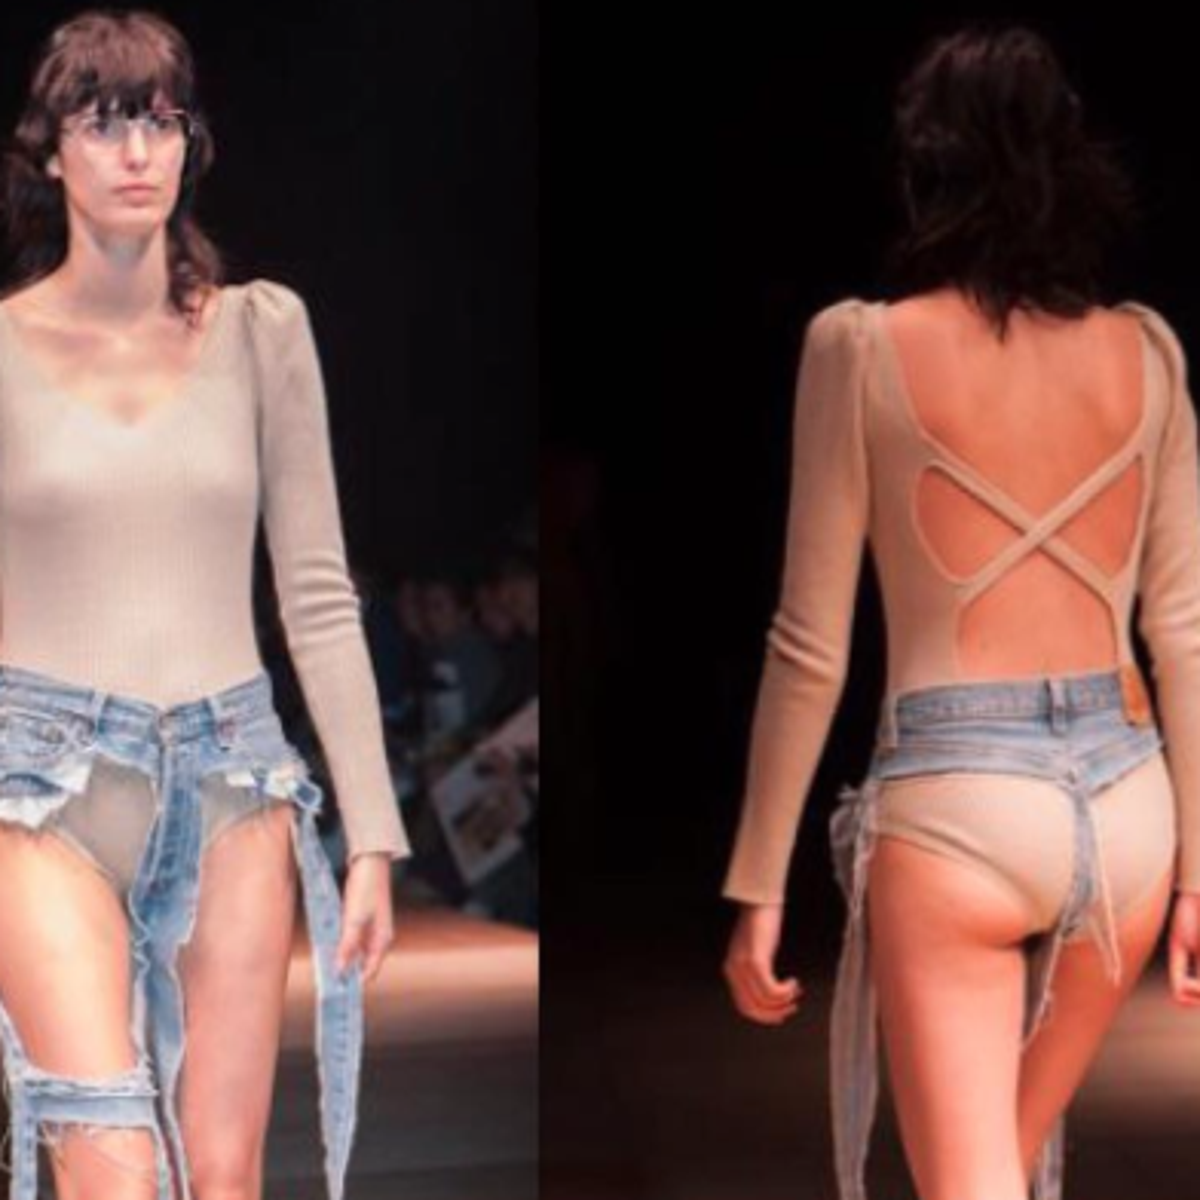 Thong jeans: A designer just debuted denim that exposes your